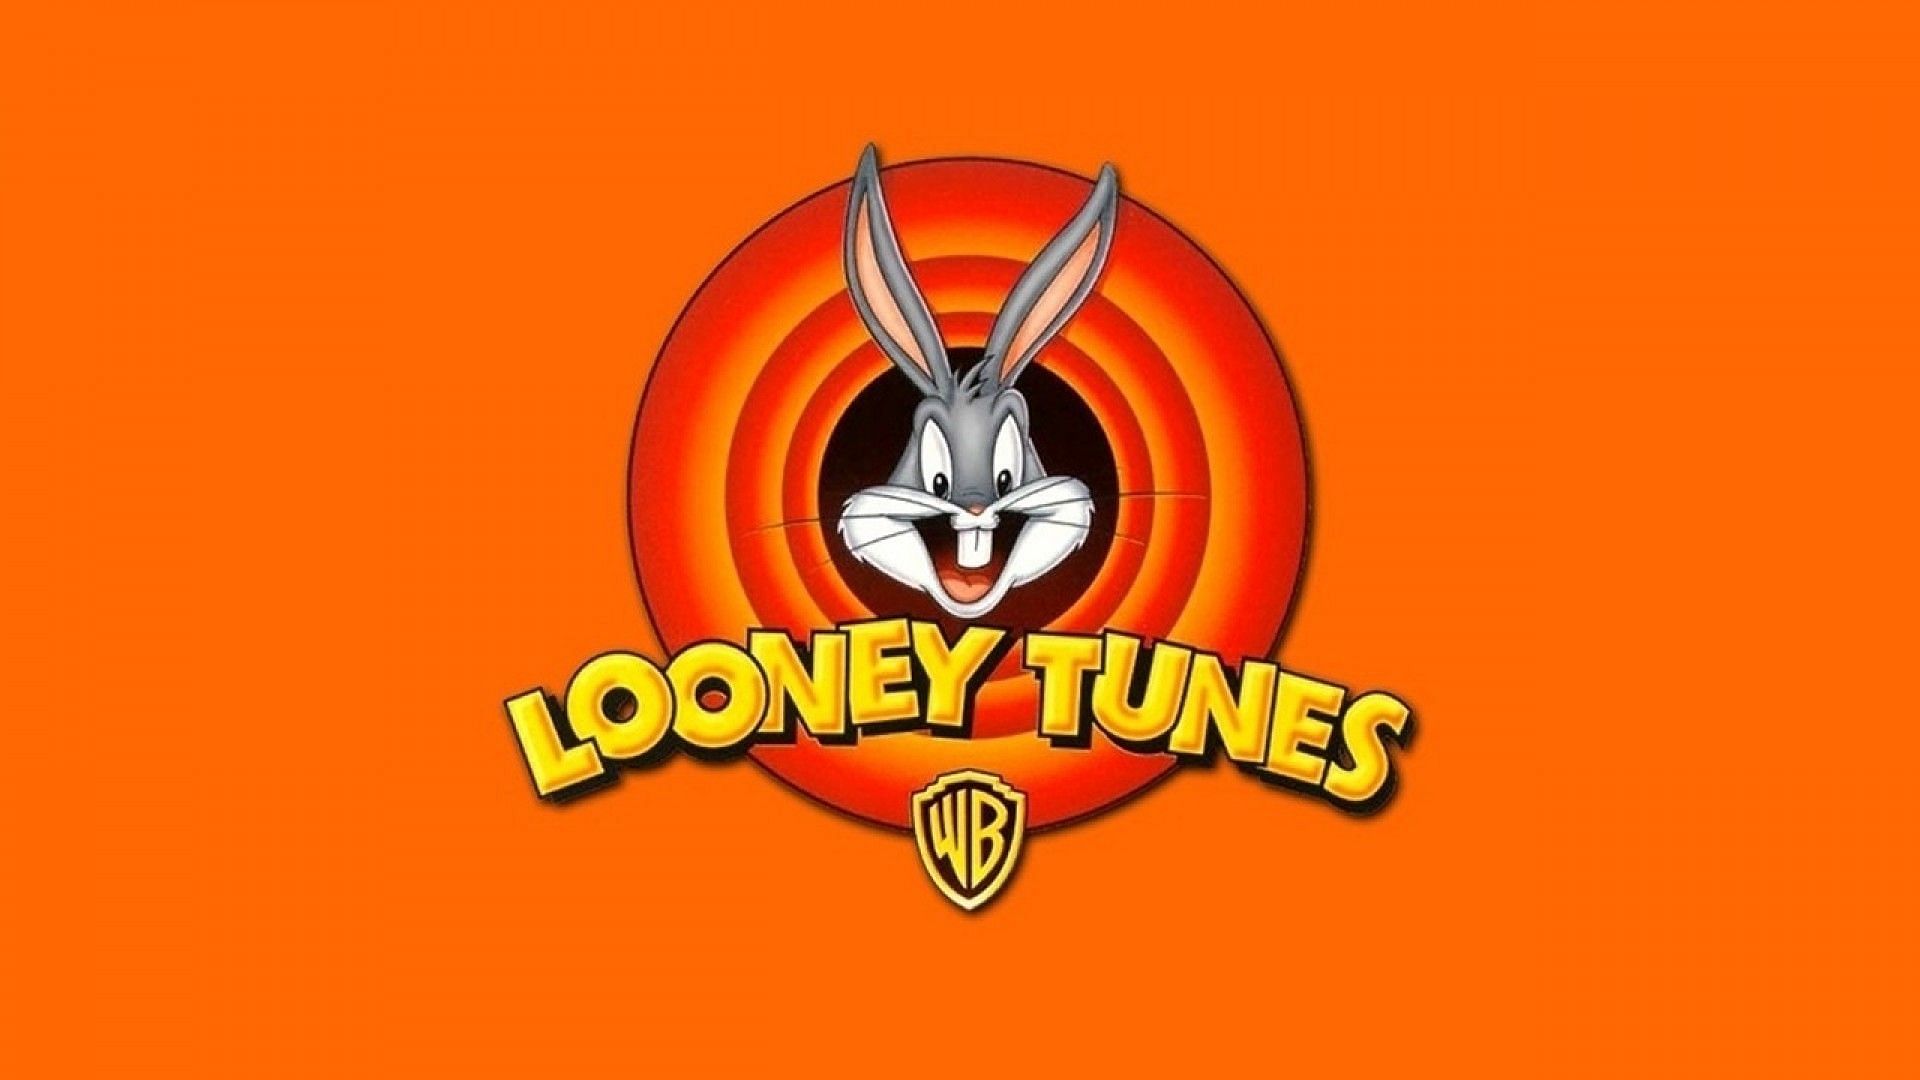 A poster for Looney Tunes (Image via WB)